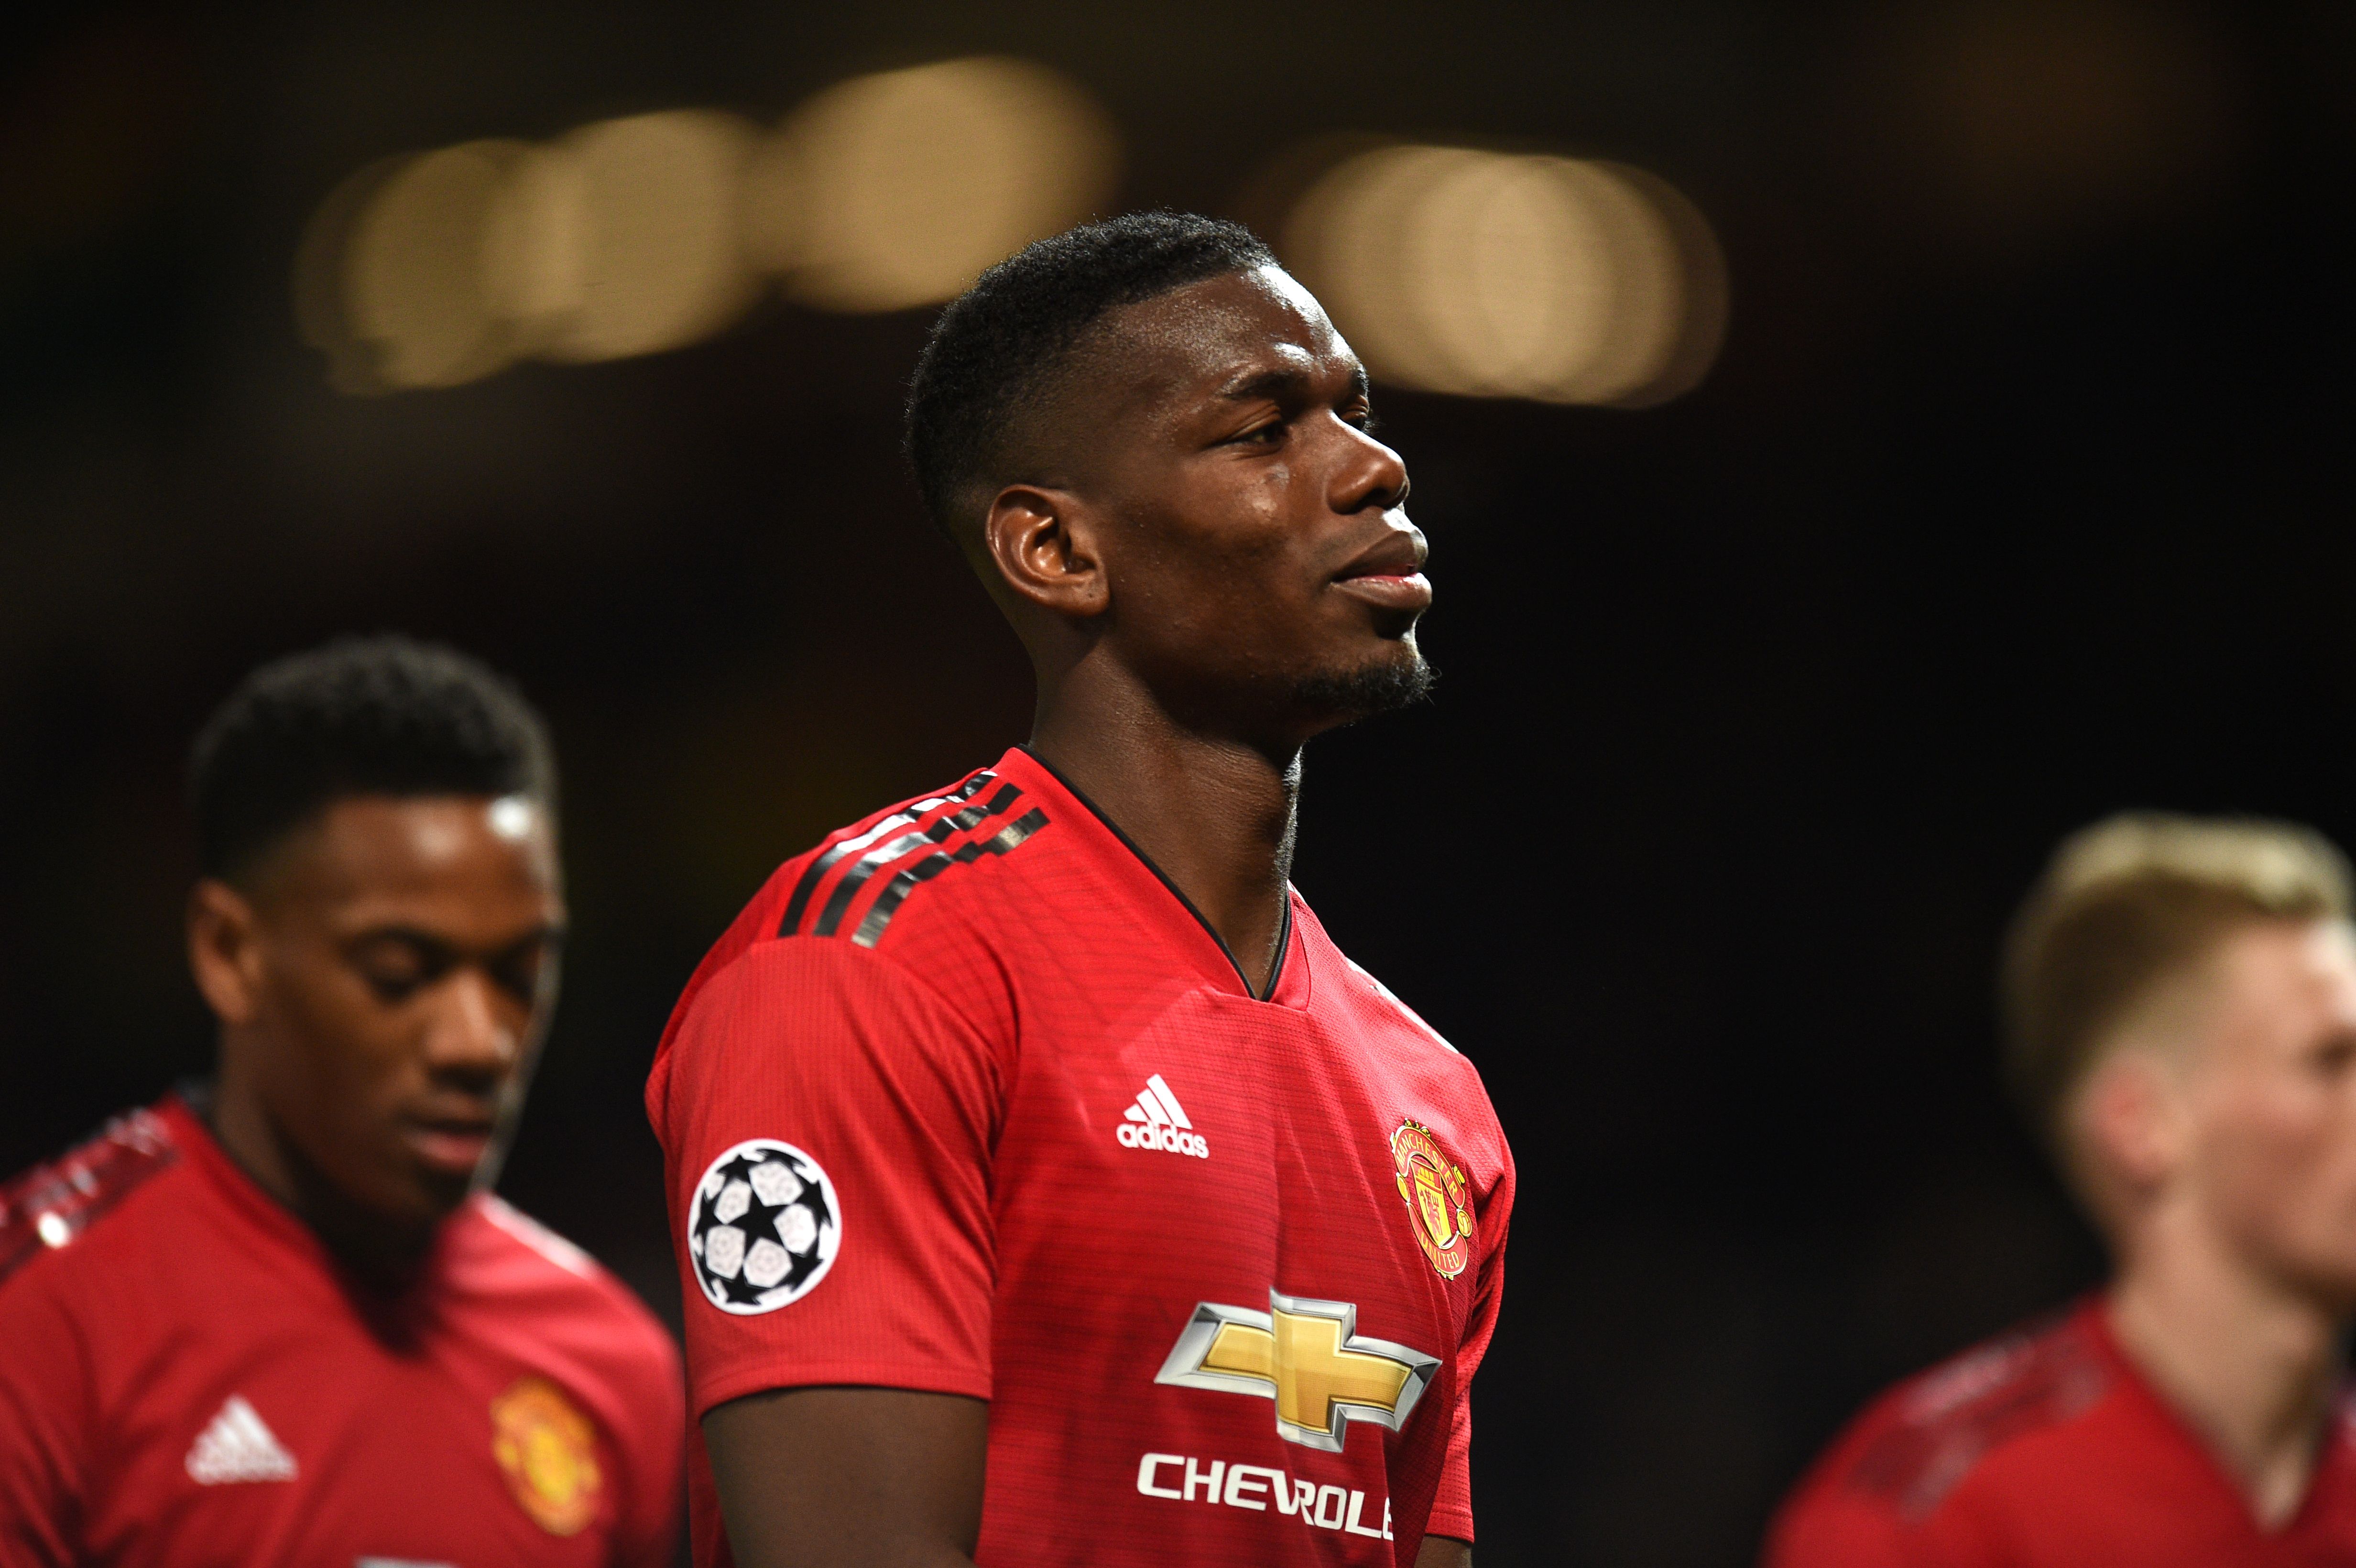 Manchester United's French midfielder Paul Pogba reacts after losing the UEFA Champions league first leg quarter-final football match between Manchester United and Barcelona at Old Trafford in Manchester, north west England, on April 10, 2019. (Photo by Oli SCARFF / AFP)        (Photo credit should read OLI SCARFF/AFP/Getty Images)